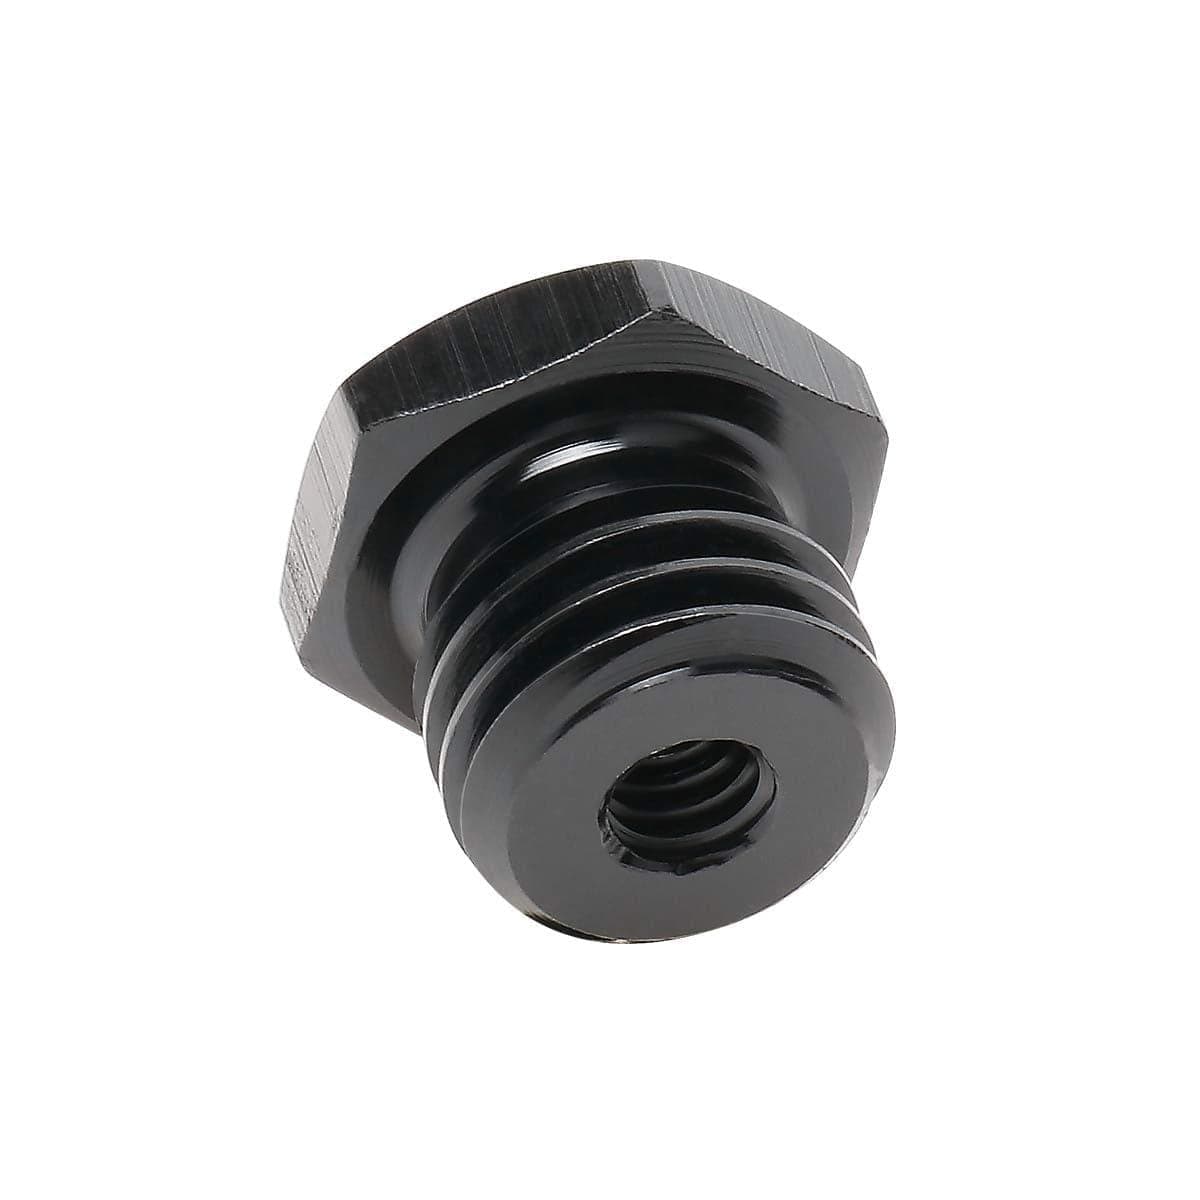 HUEPAR Adapter with 1/4 inch to 5/8 inch thread conversion for tripods and laser levels with free shipping in the US2